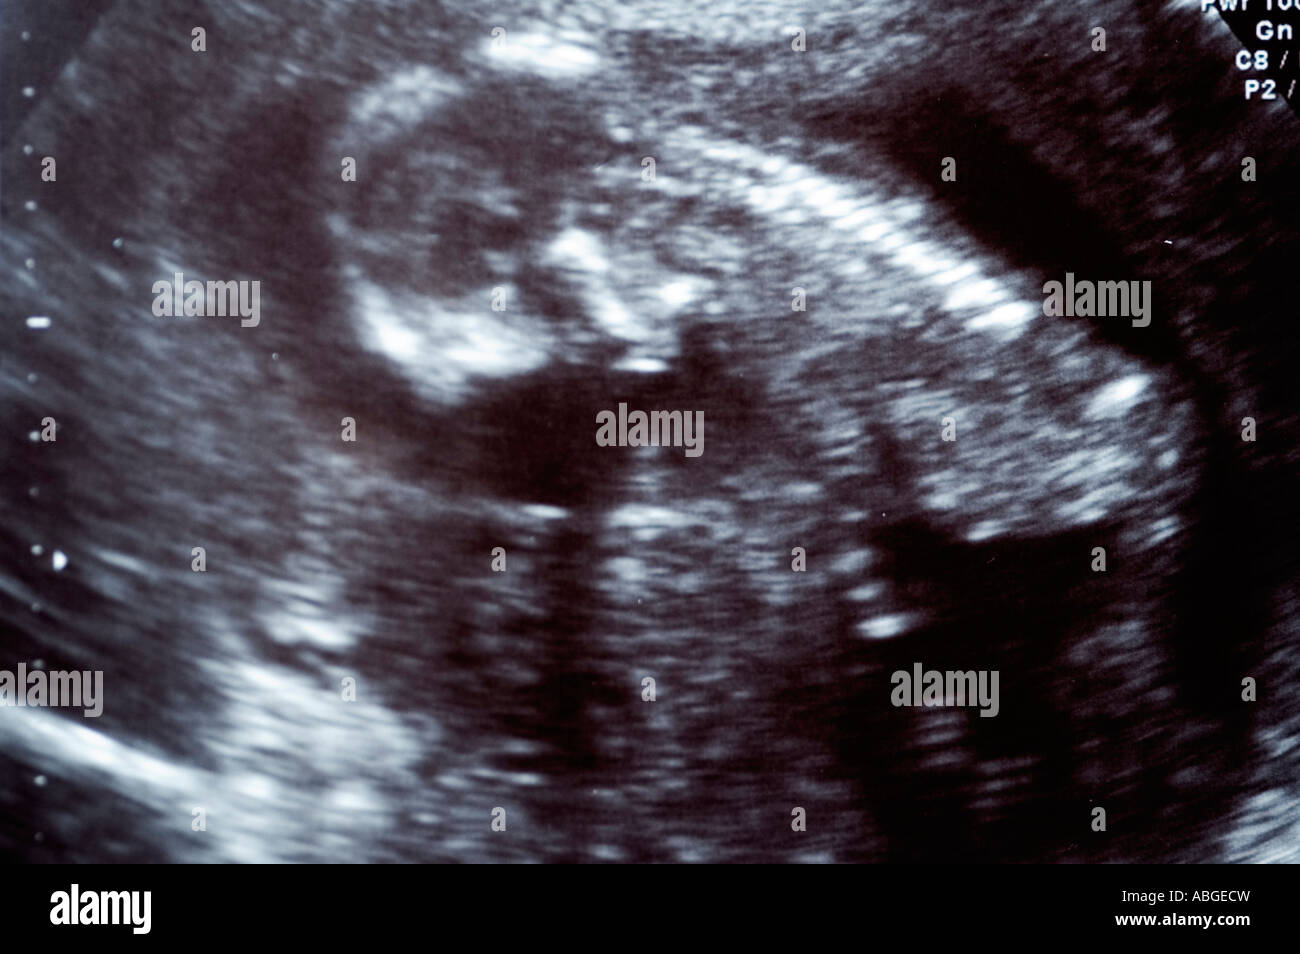 Scan of foetus aged 12 weeks old Stock Photo